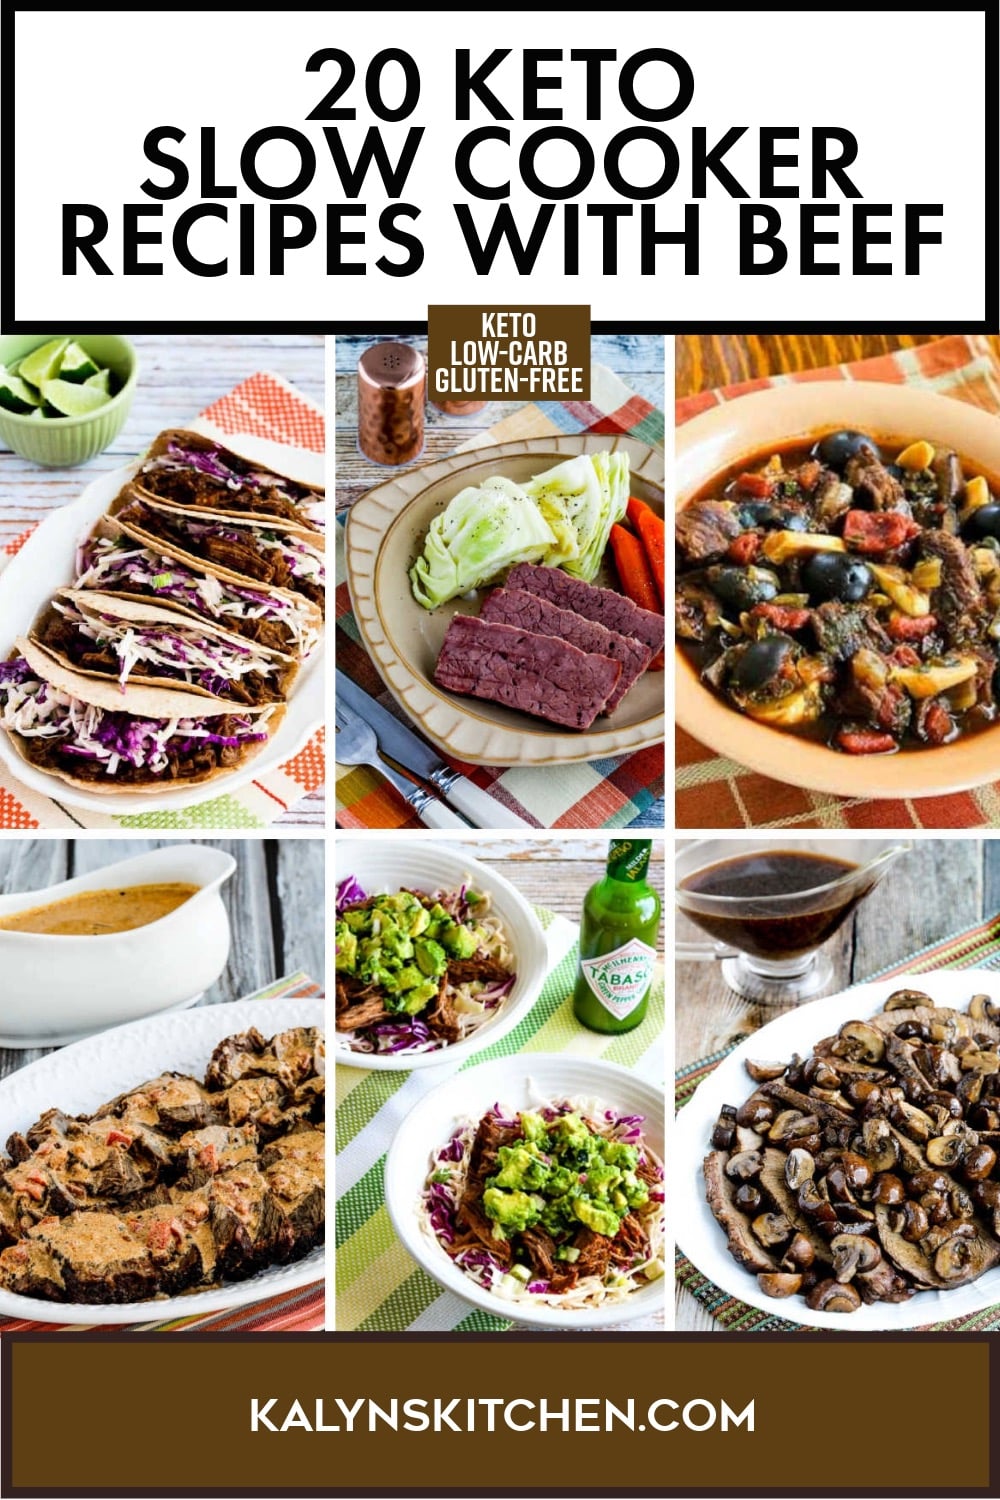 Pinterest image of 20 Keto Slow Cooker Recipes with Beef